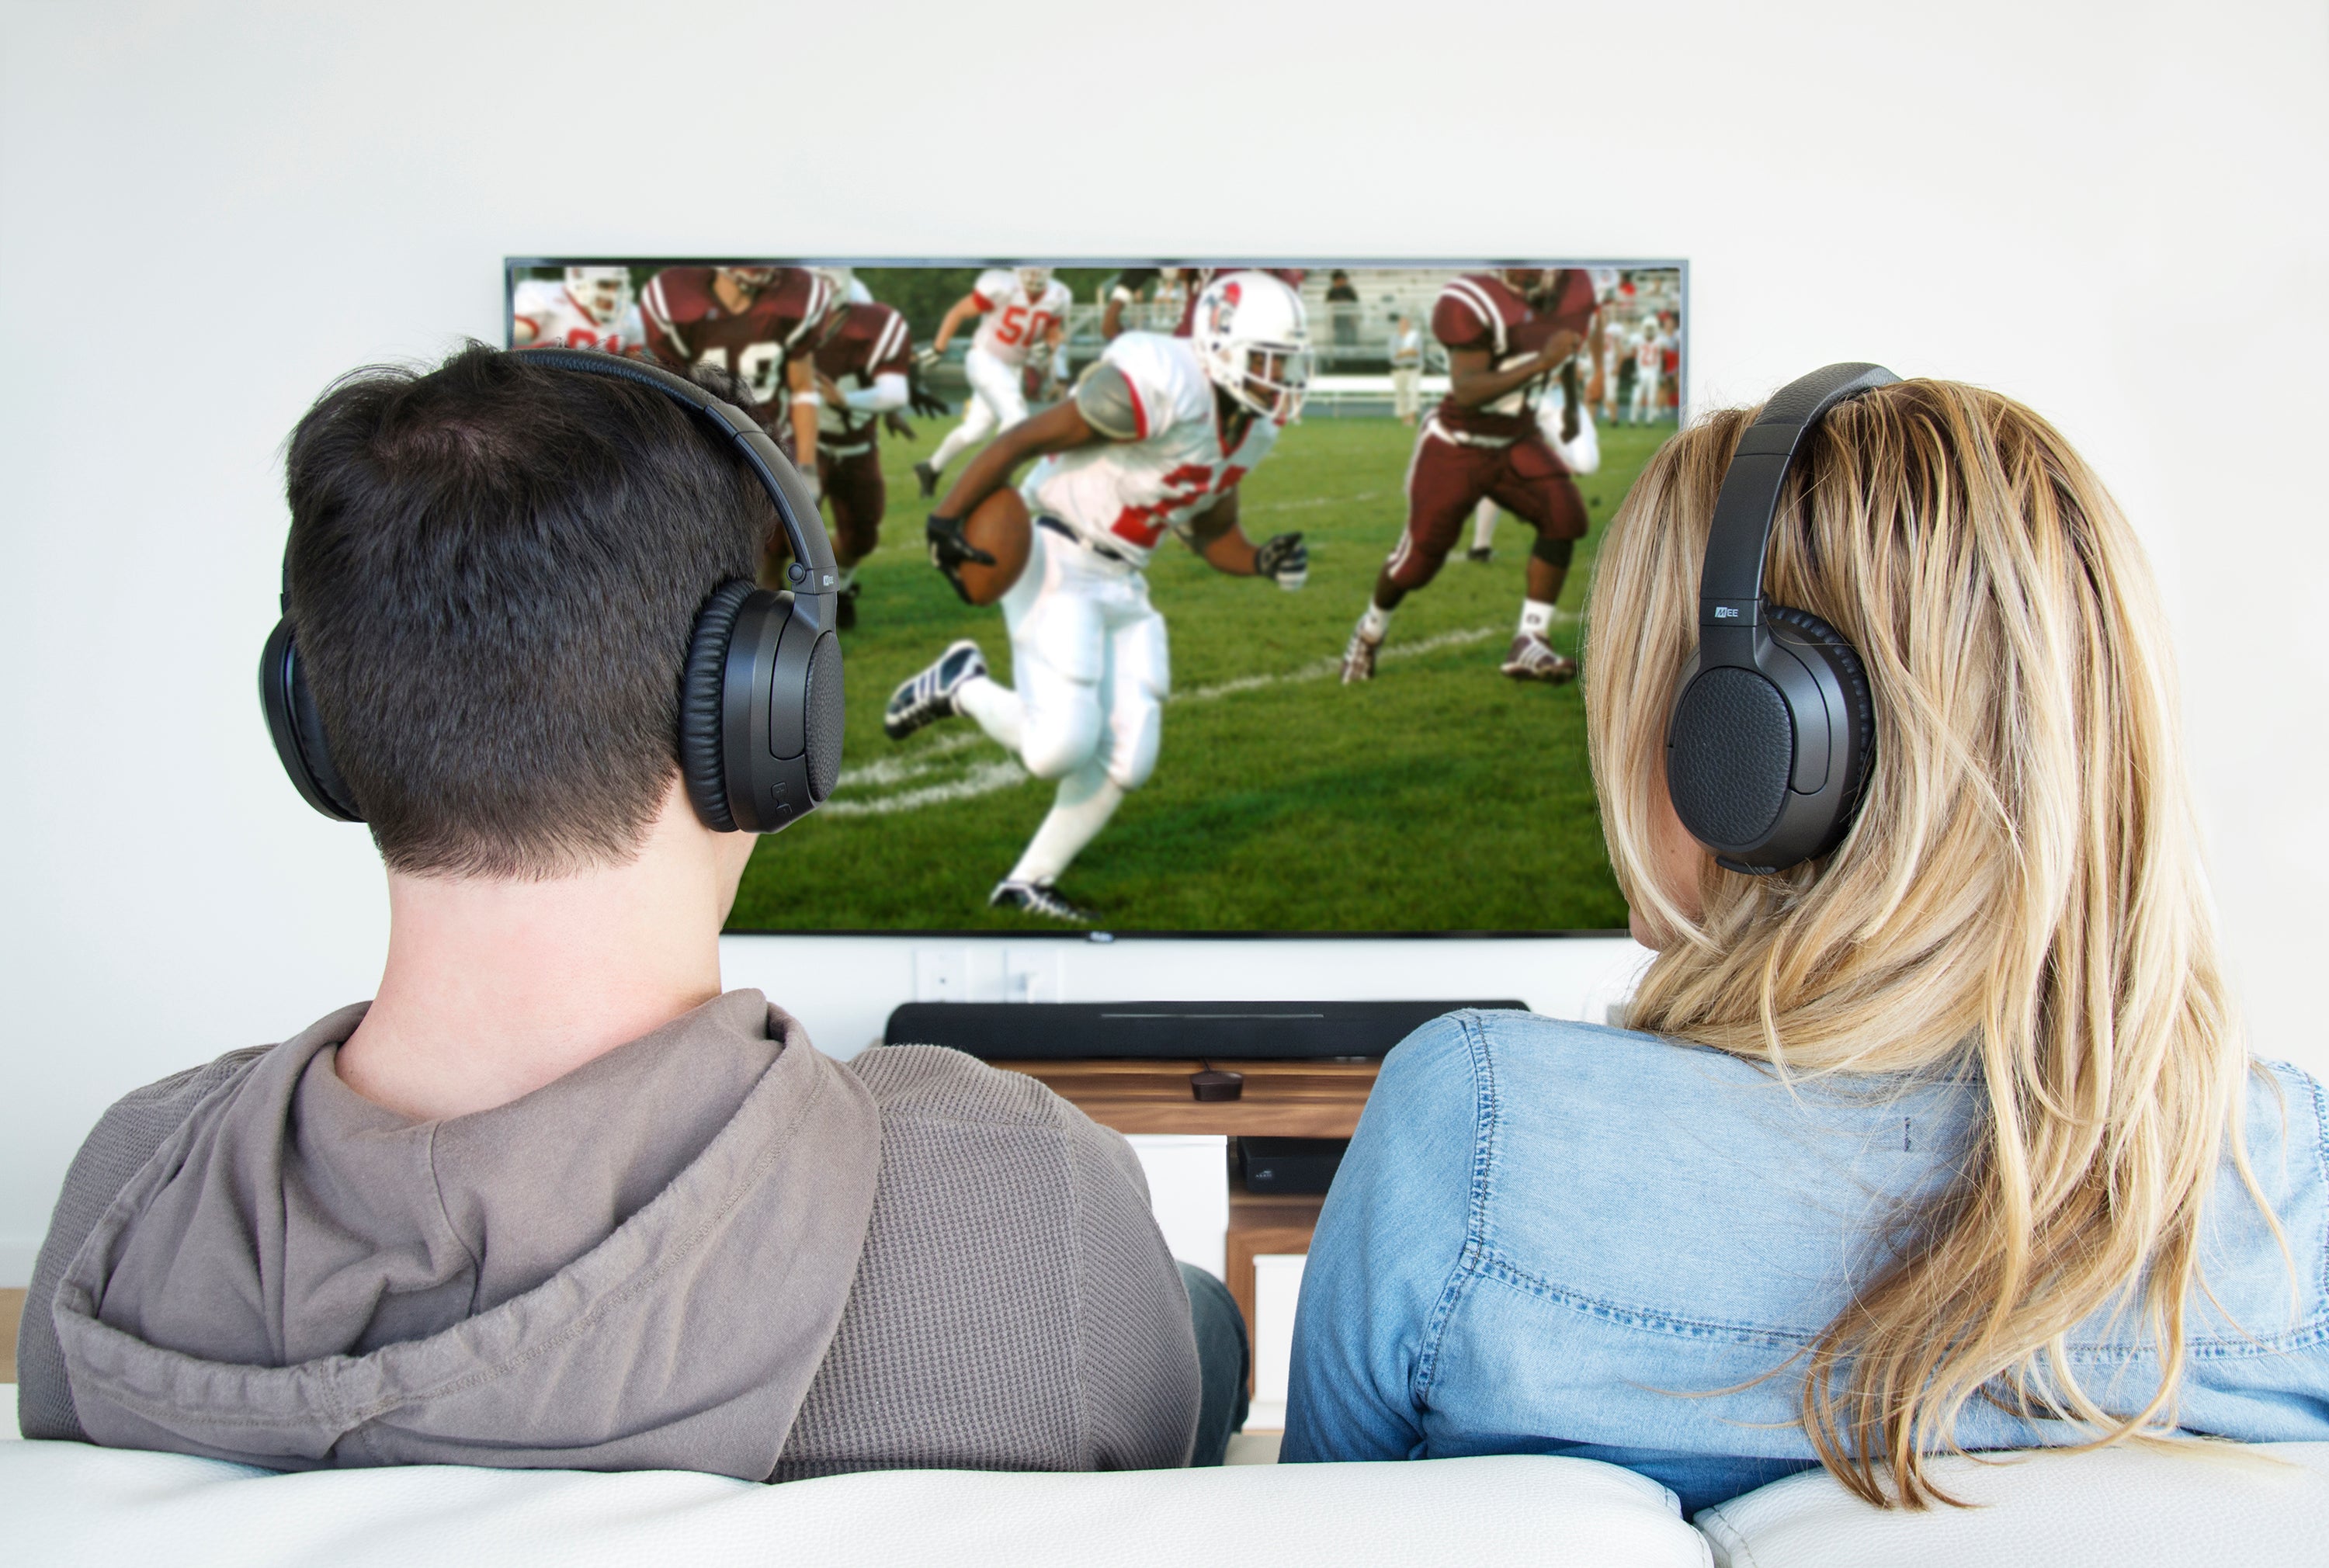 A man and a woman wearing headphones sit on a couch, watching a football game on a large tv screen in a bright living room.